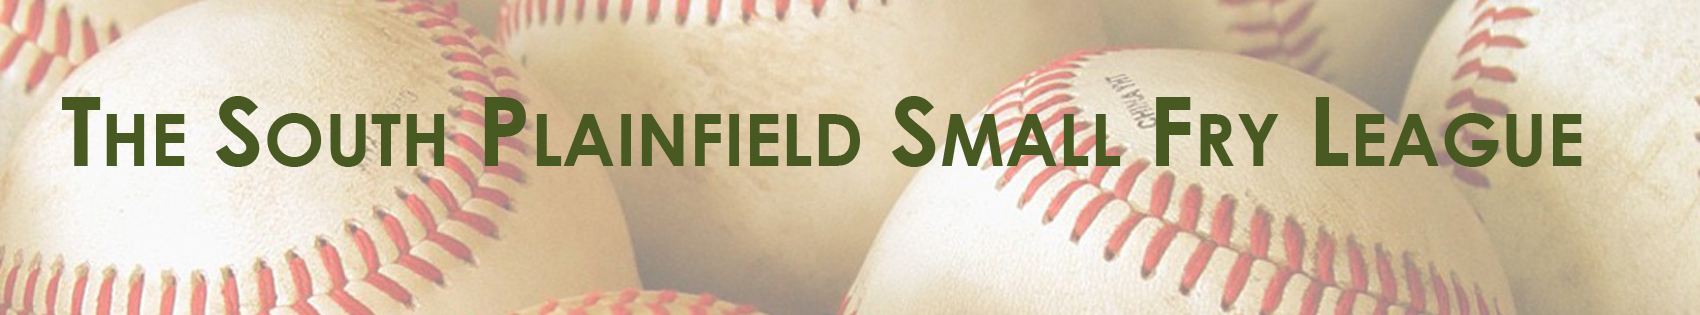 The South Plainfield Small Fry League